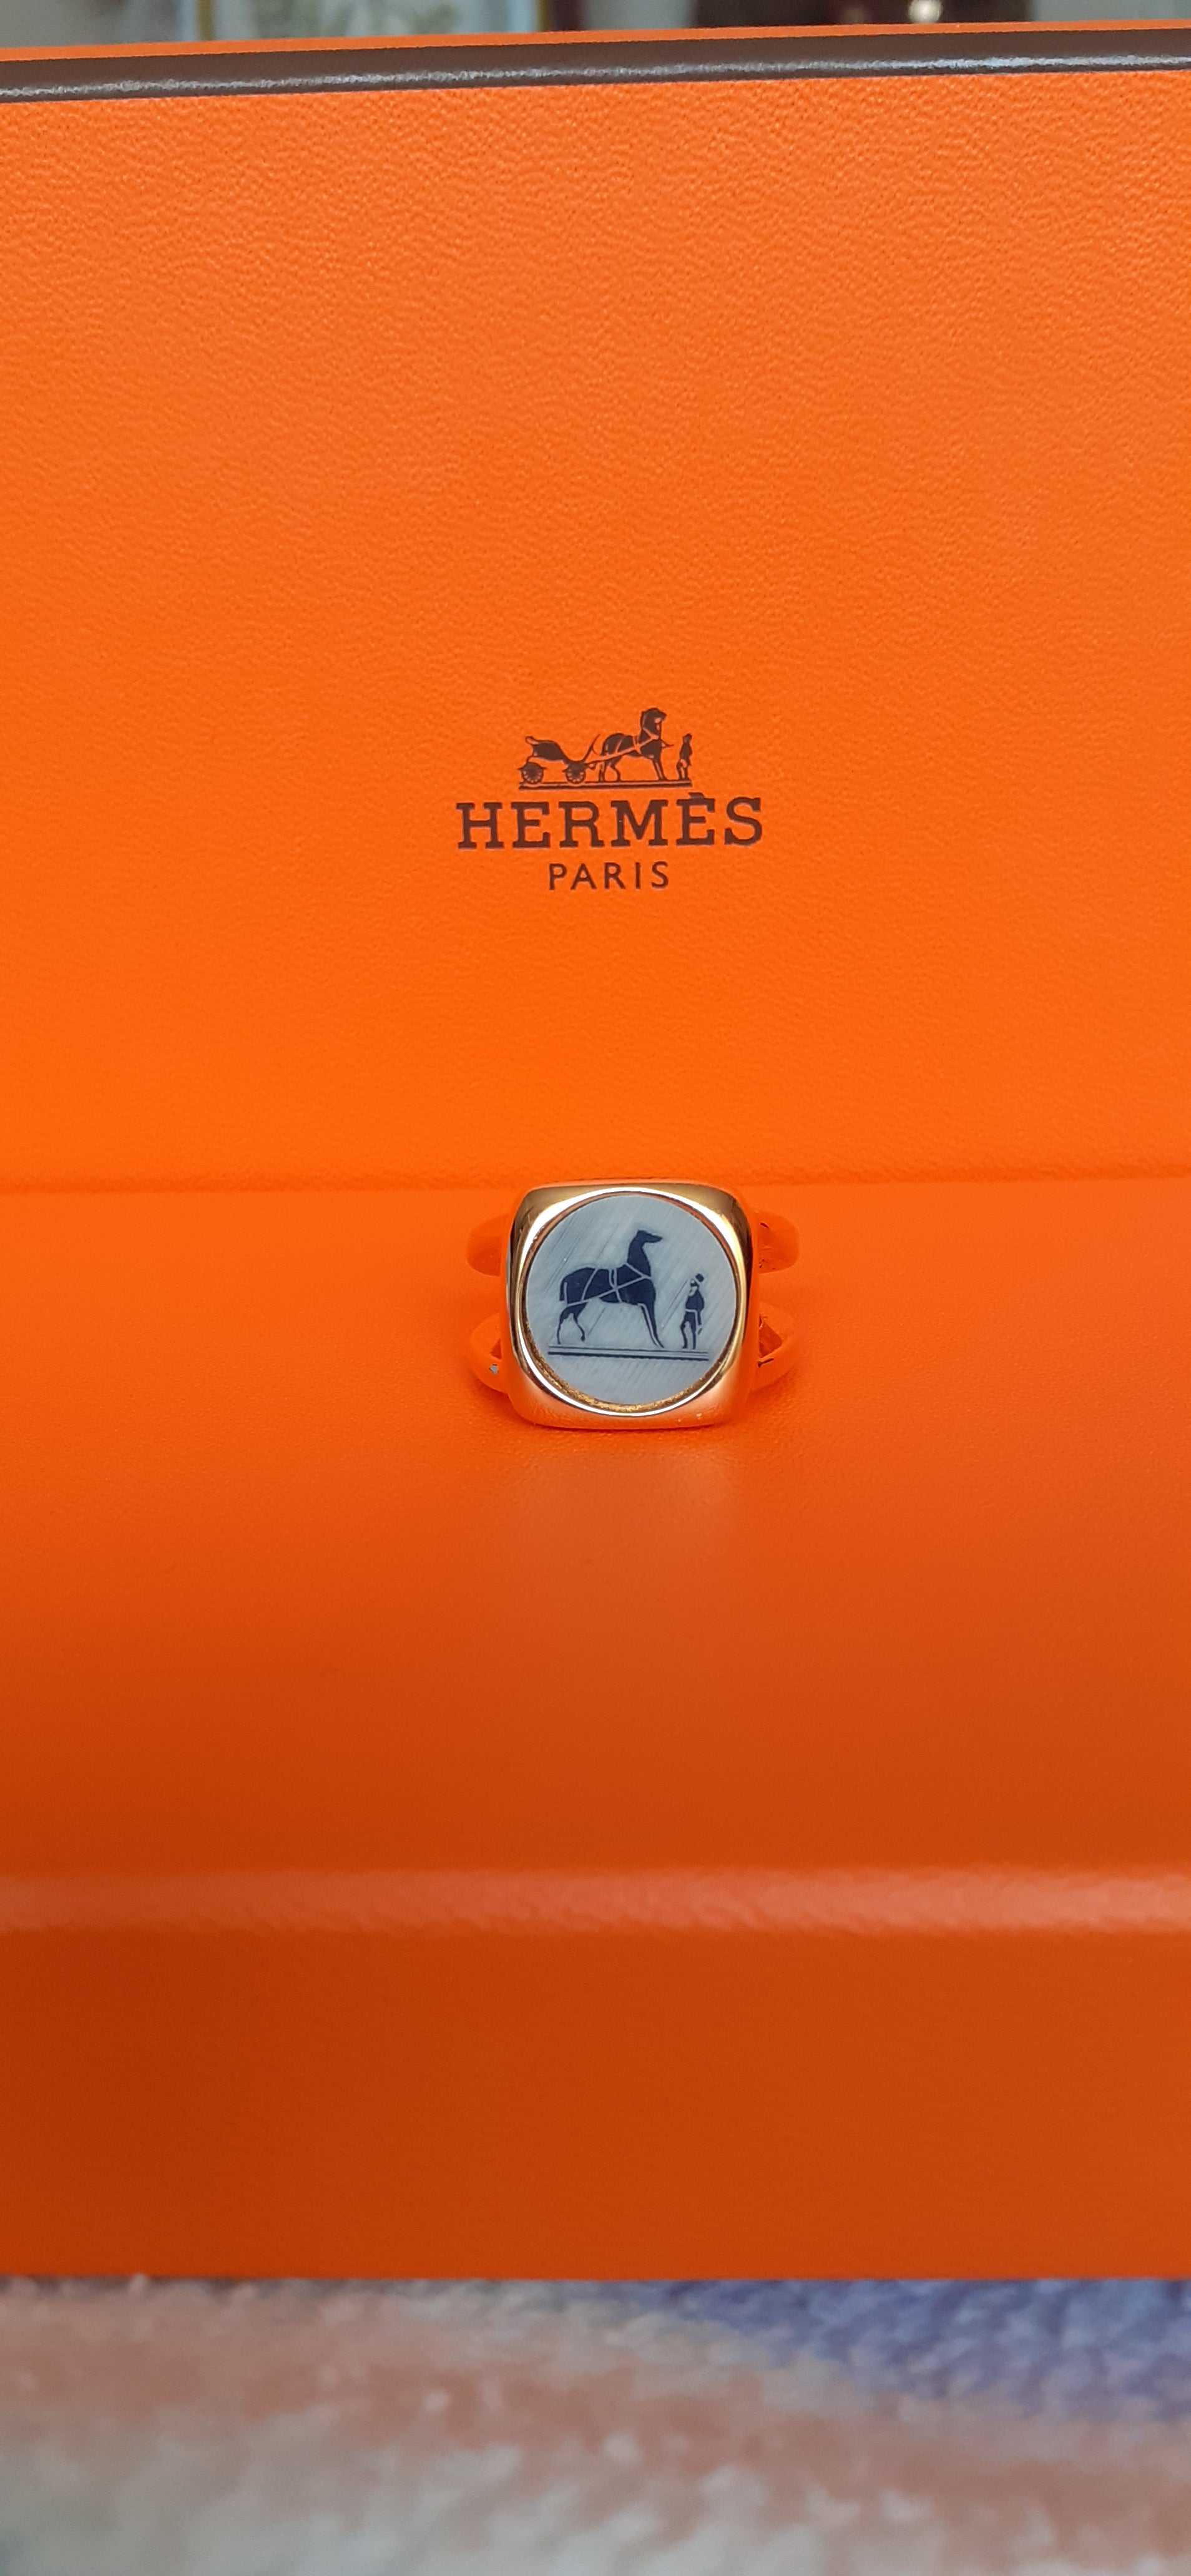 Lovely and Rare Authentic Hermès Ring

For both mena and women

Signet ring style

Print: Horse and Rider

Made of corozo (palm tree nut) and non precious metal

Colorways: Golden, Grey and Navy

Ring with 2 rows meeting at the back

